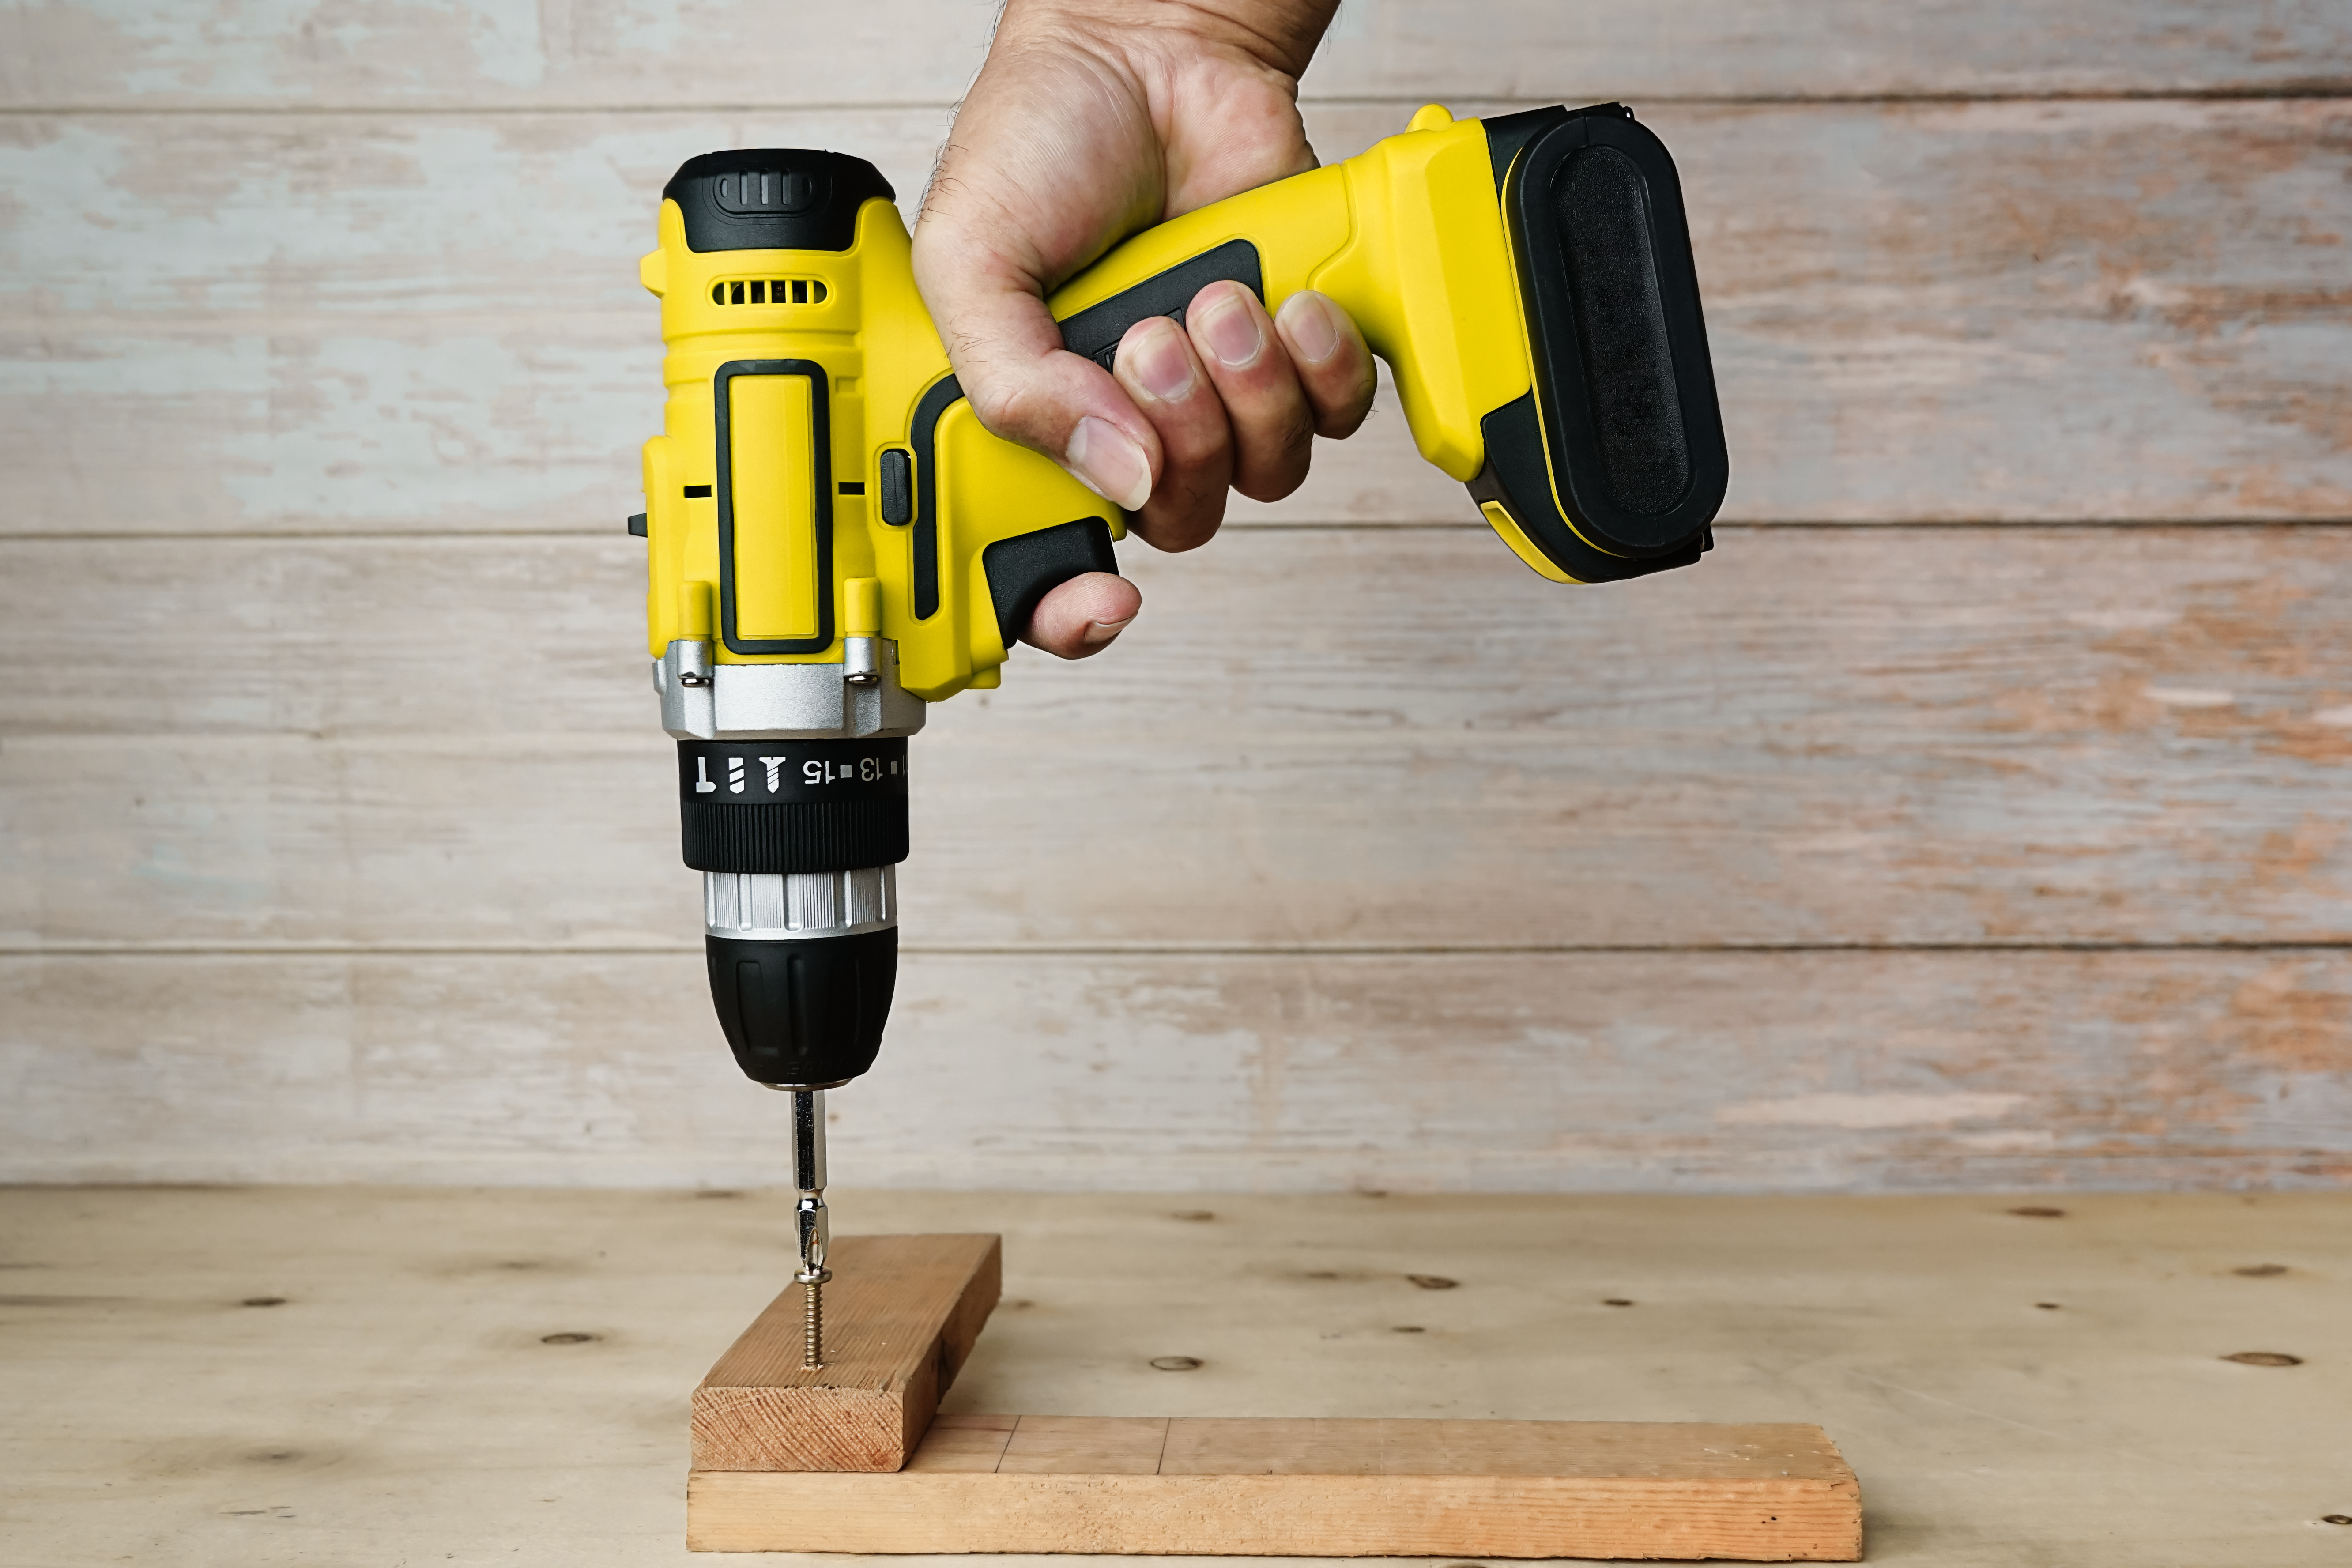 A close-up photograph of a carpenter's hand holding a cordless drill or electric screwdriver, screwing into a piece of wood